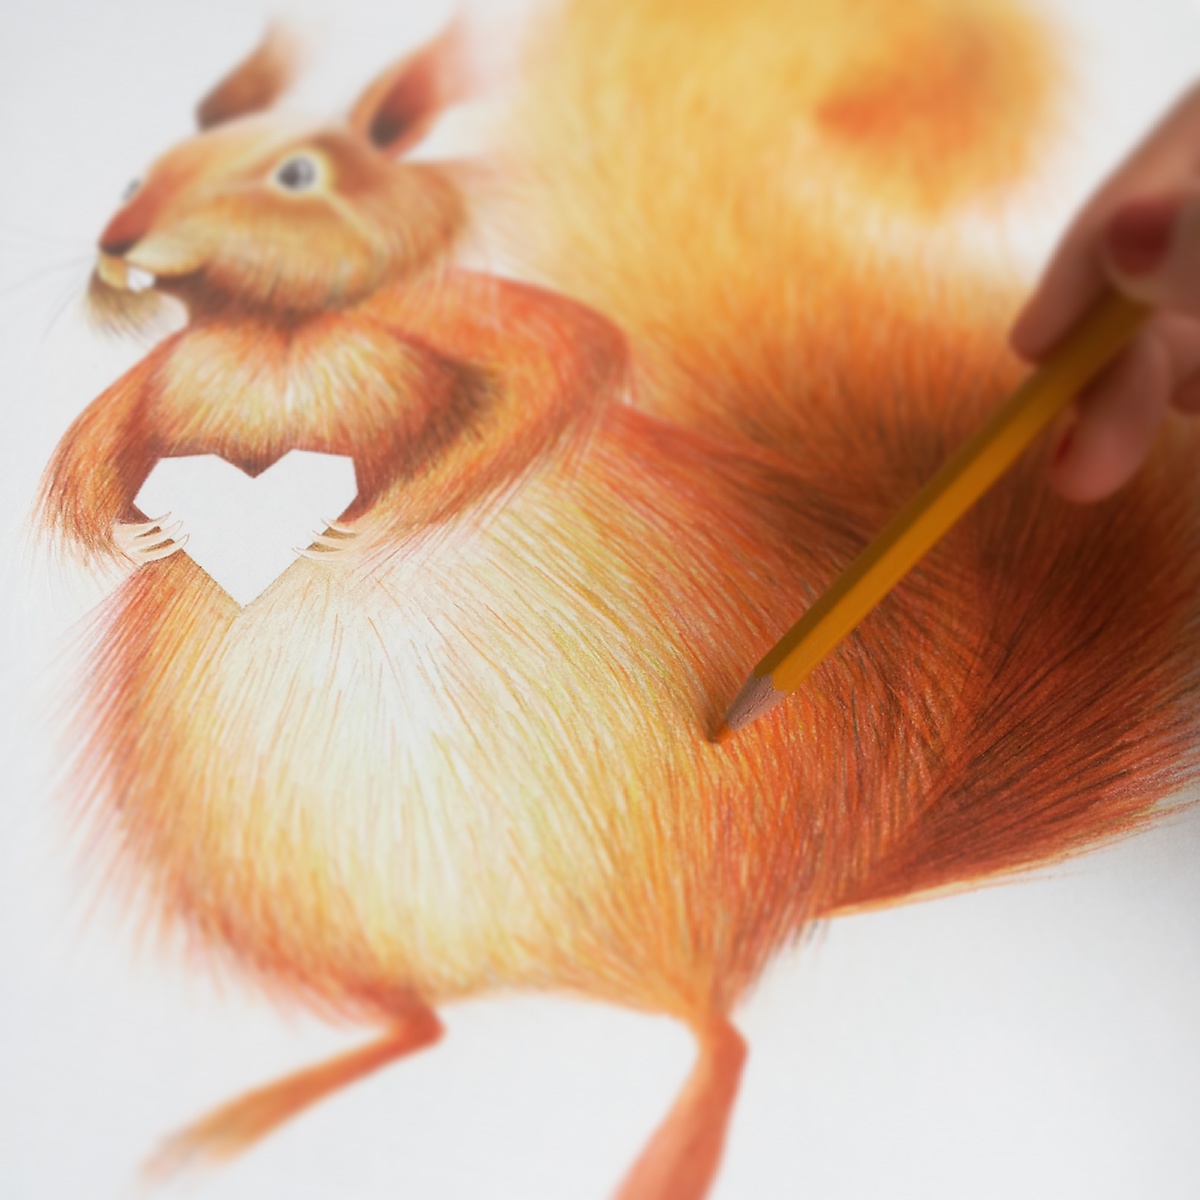 squirrel animal orange heart green forest Nature draw pencil paper